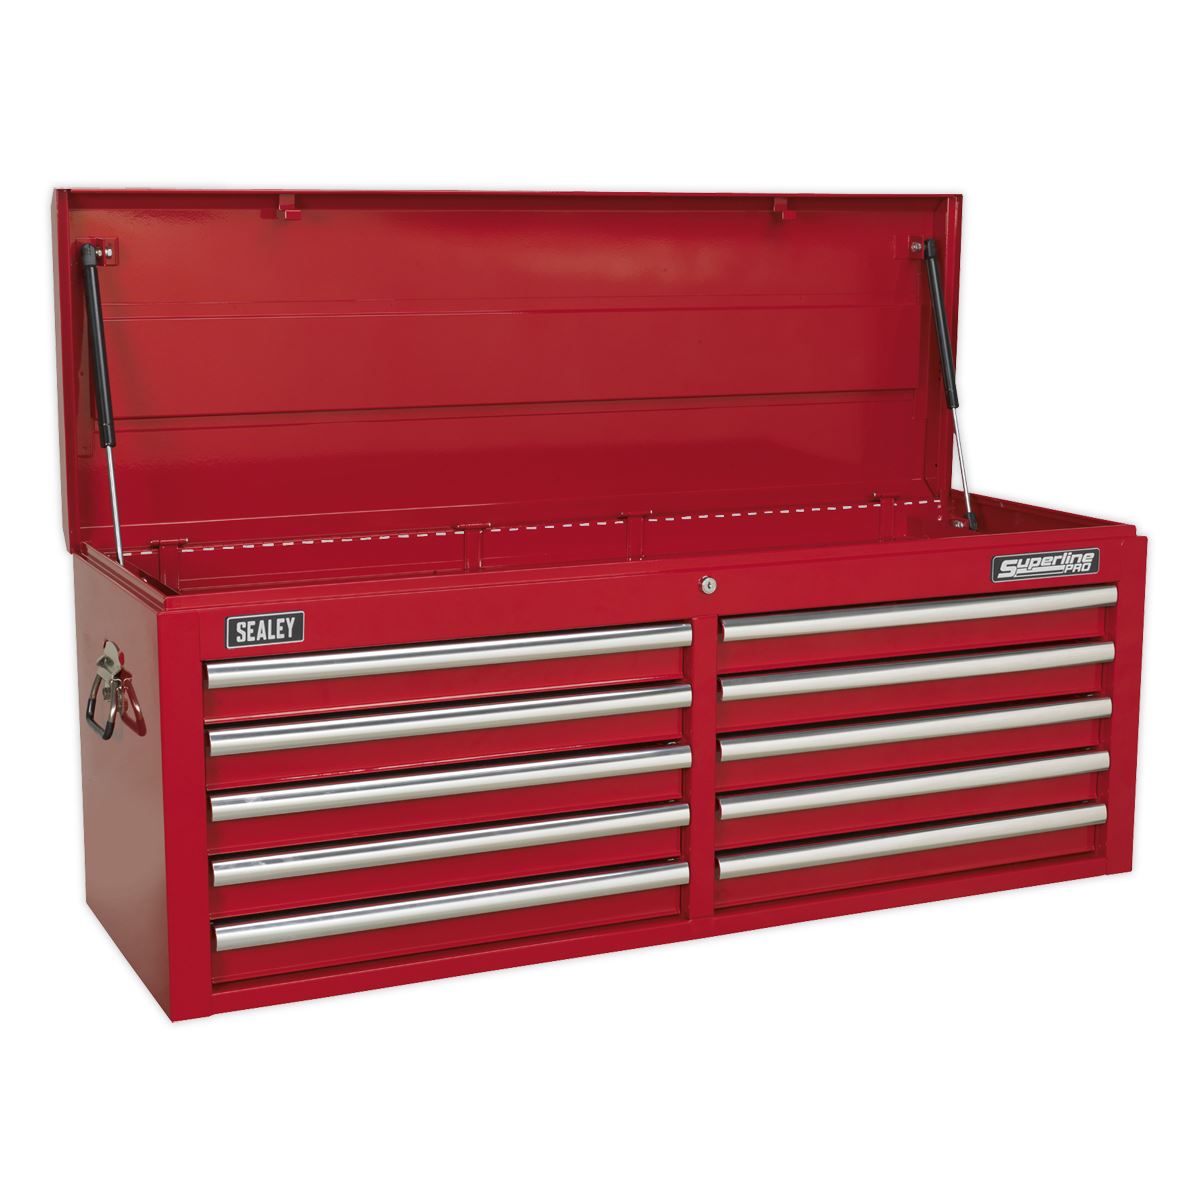 Sealey Superline Pro Topchest 10 Drawer with Ball-Bearing Slides - Red